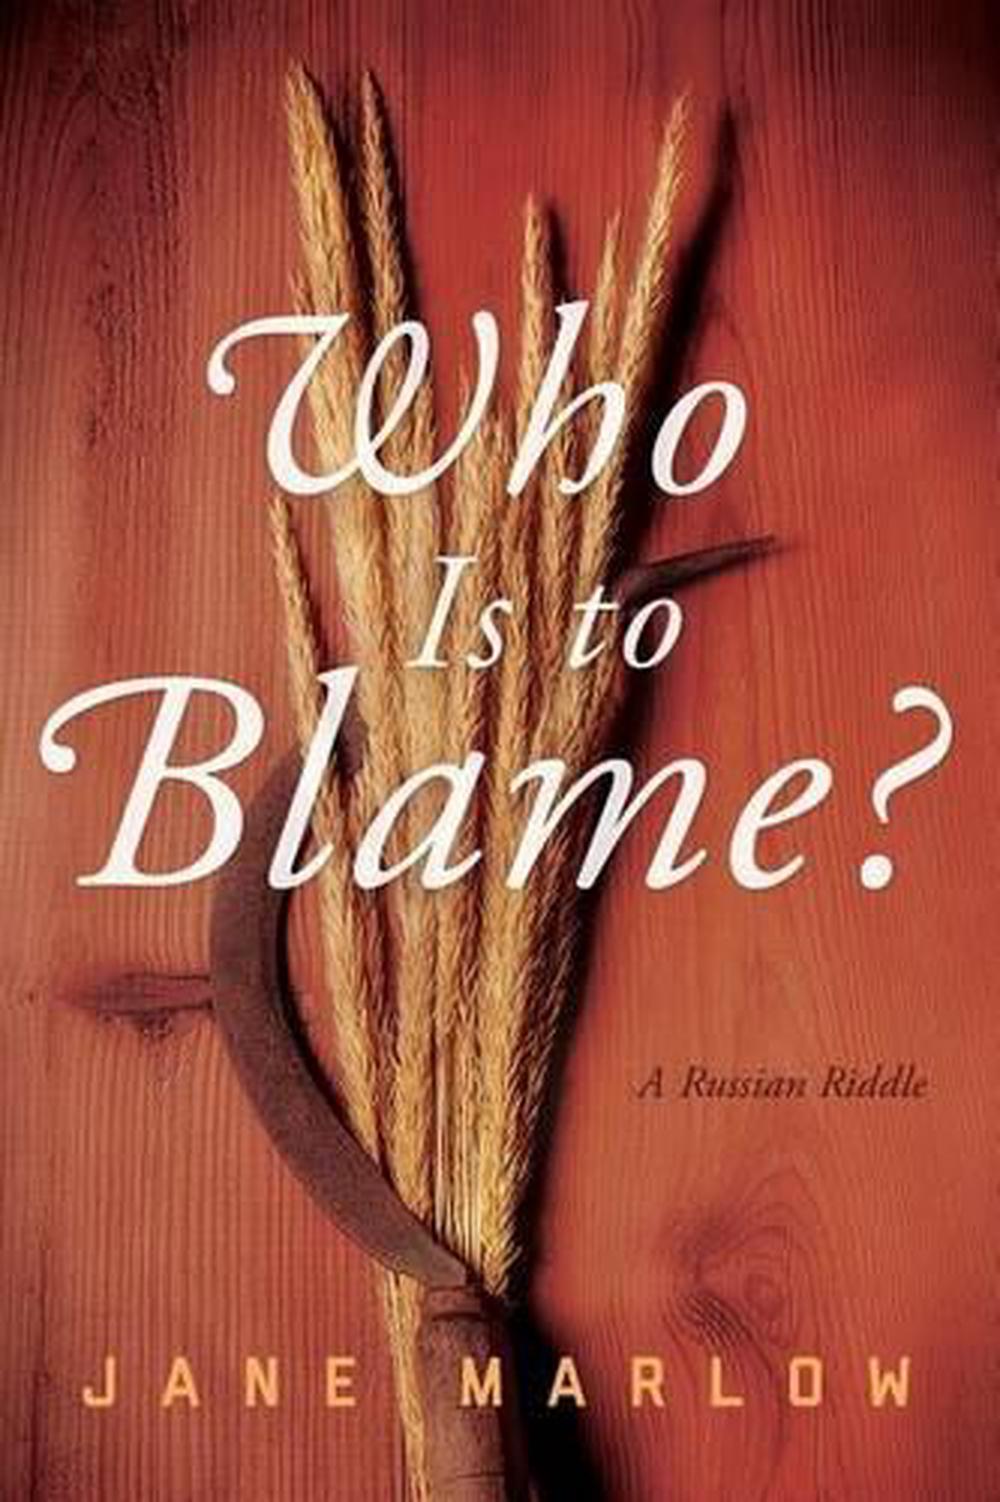 Who Is to Blame? by Jane Marlow (English) Paperback Book Free Shipping